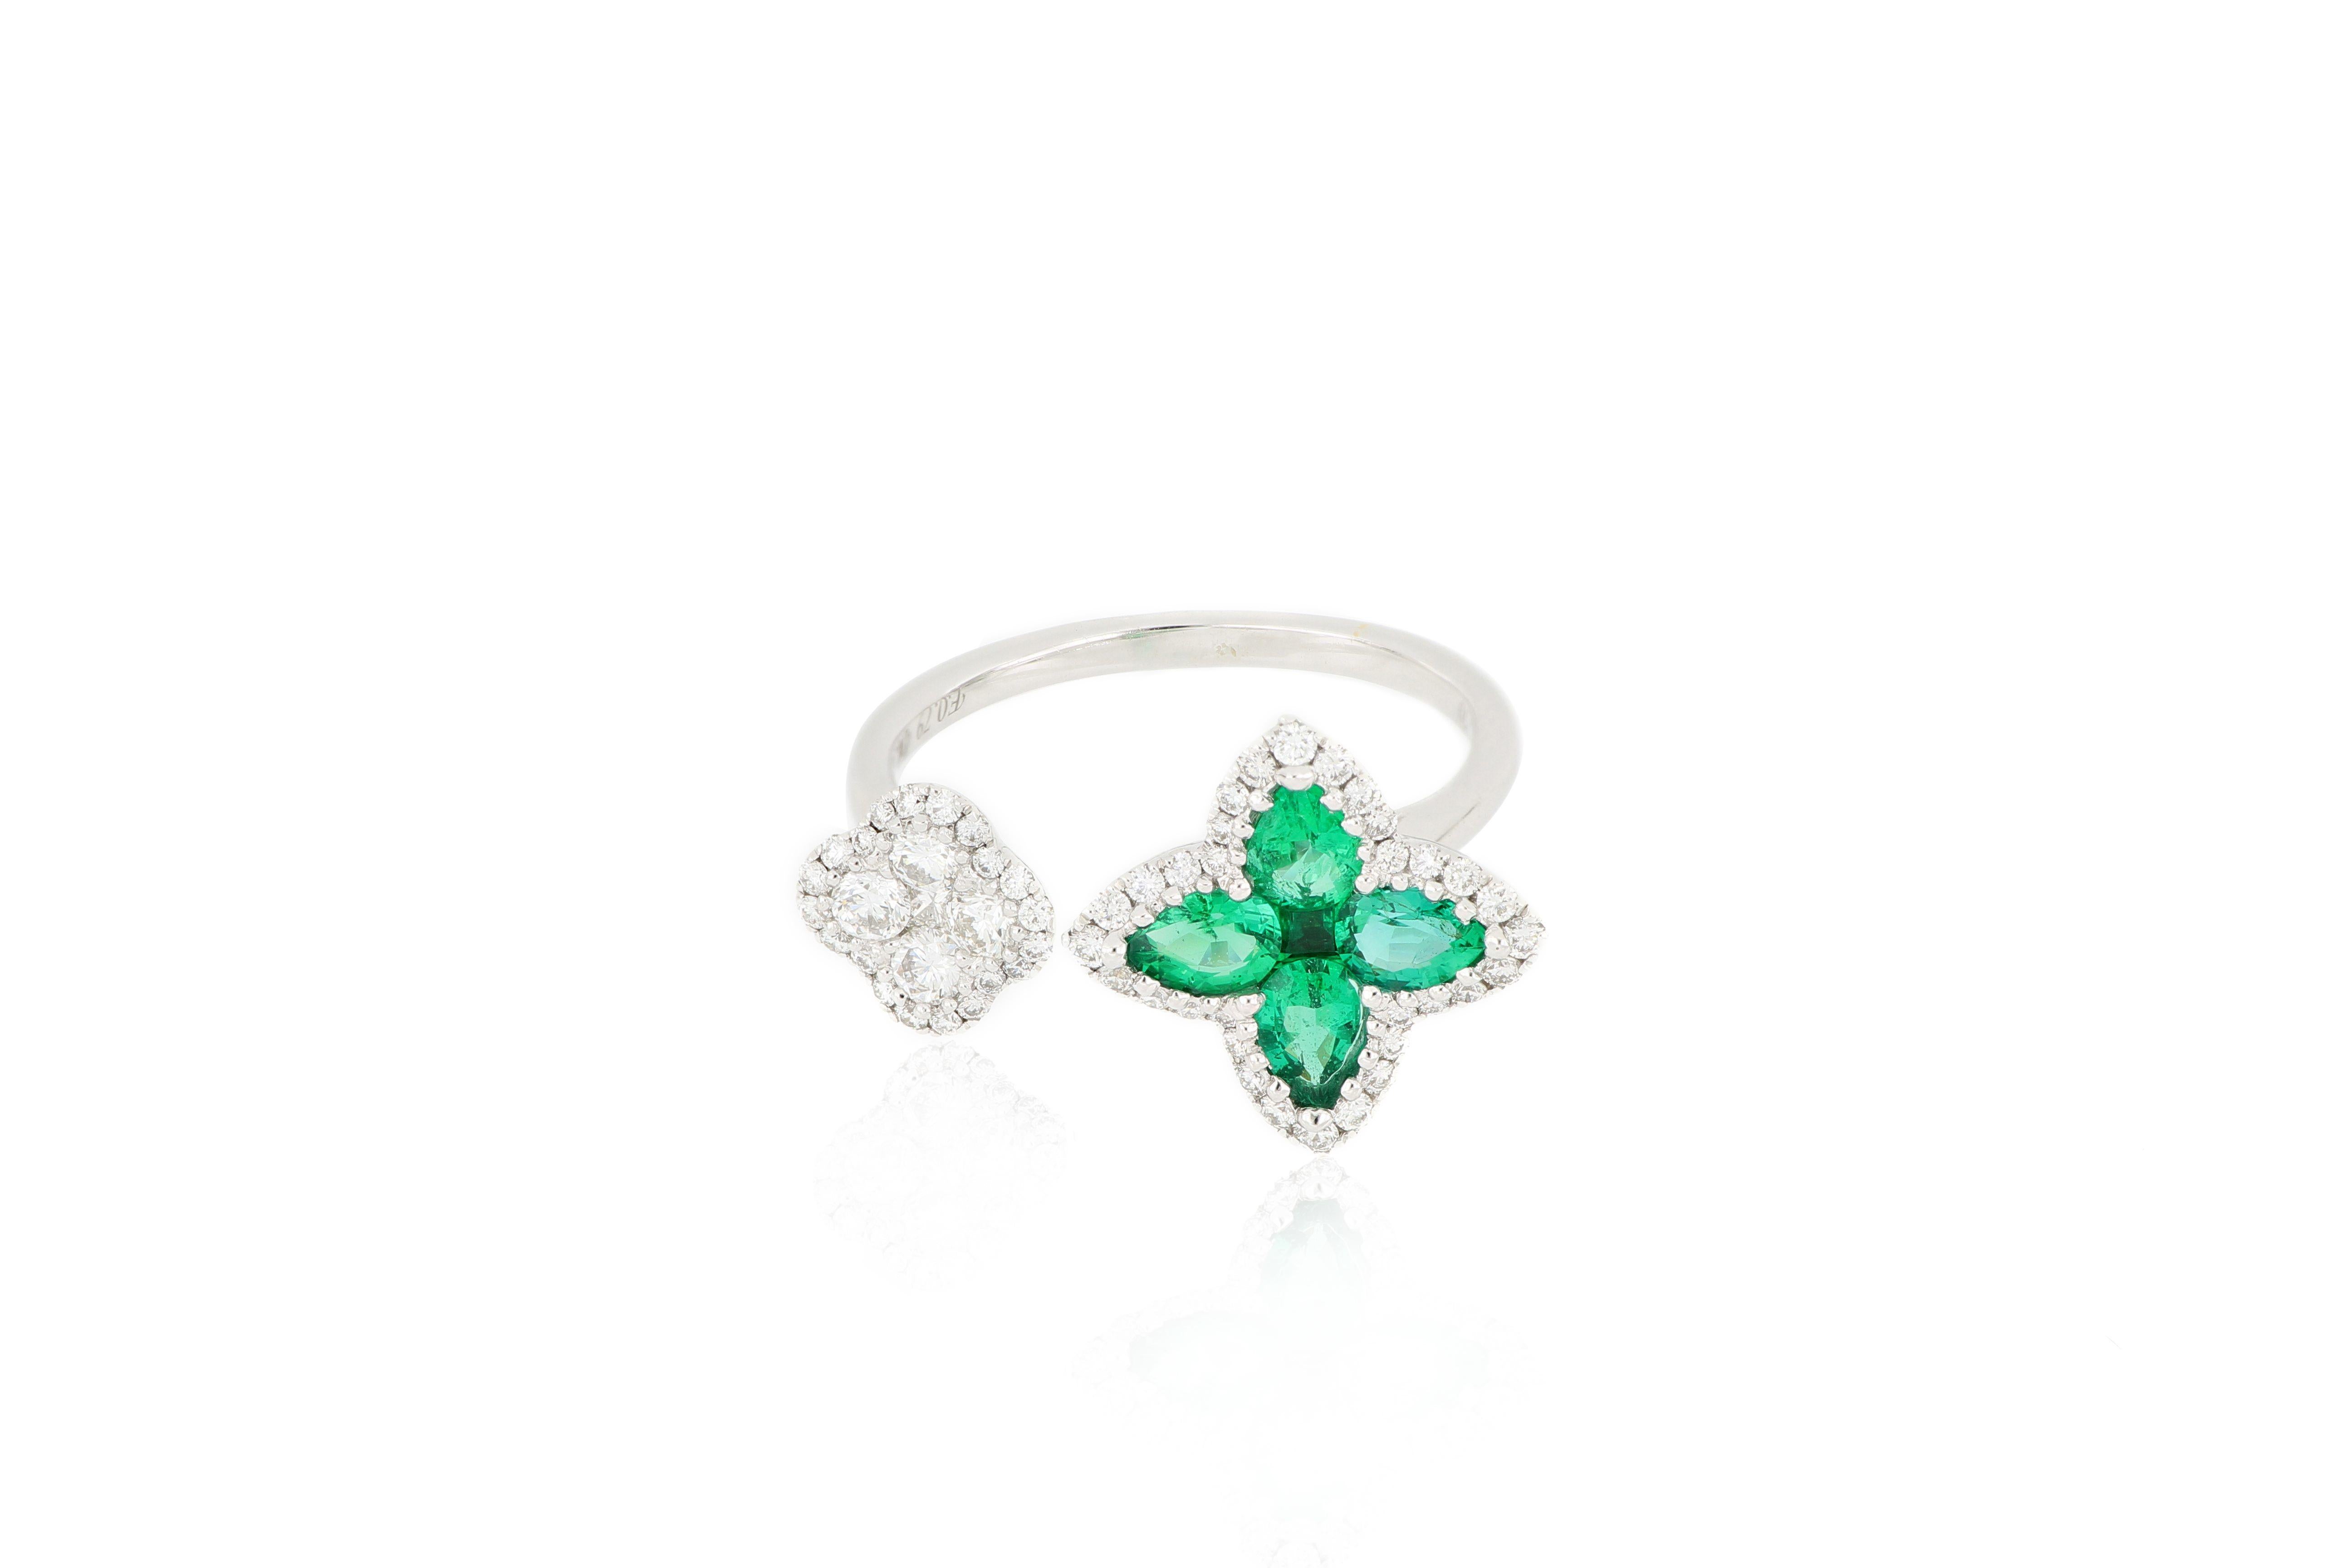 A exquisite emerald ring, set with natural emerald weighing 0.79cts and brilliant diamonds totaling 0.52cts, mounted in 18 karat white gold. A very stylish ring which can be worn for any occasion.
O’Che 1867 is renowned for its high jewellery